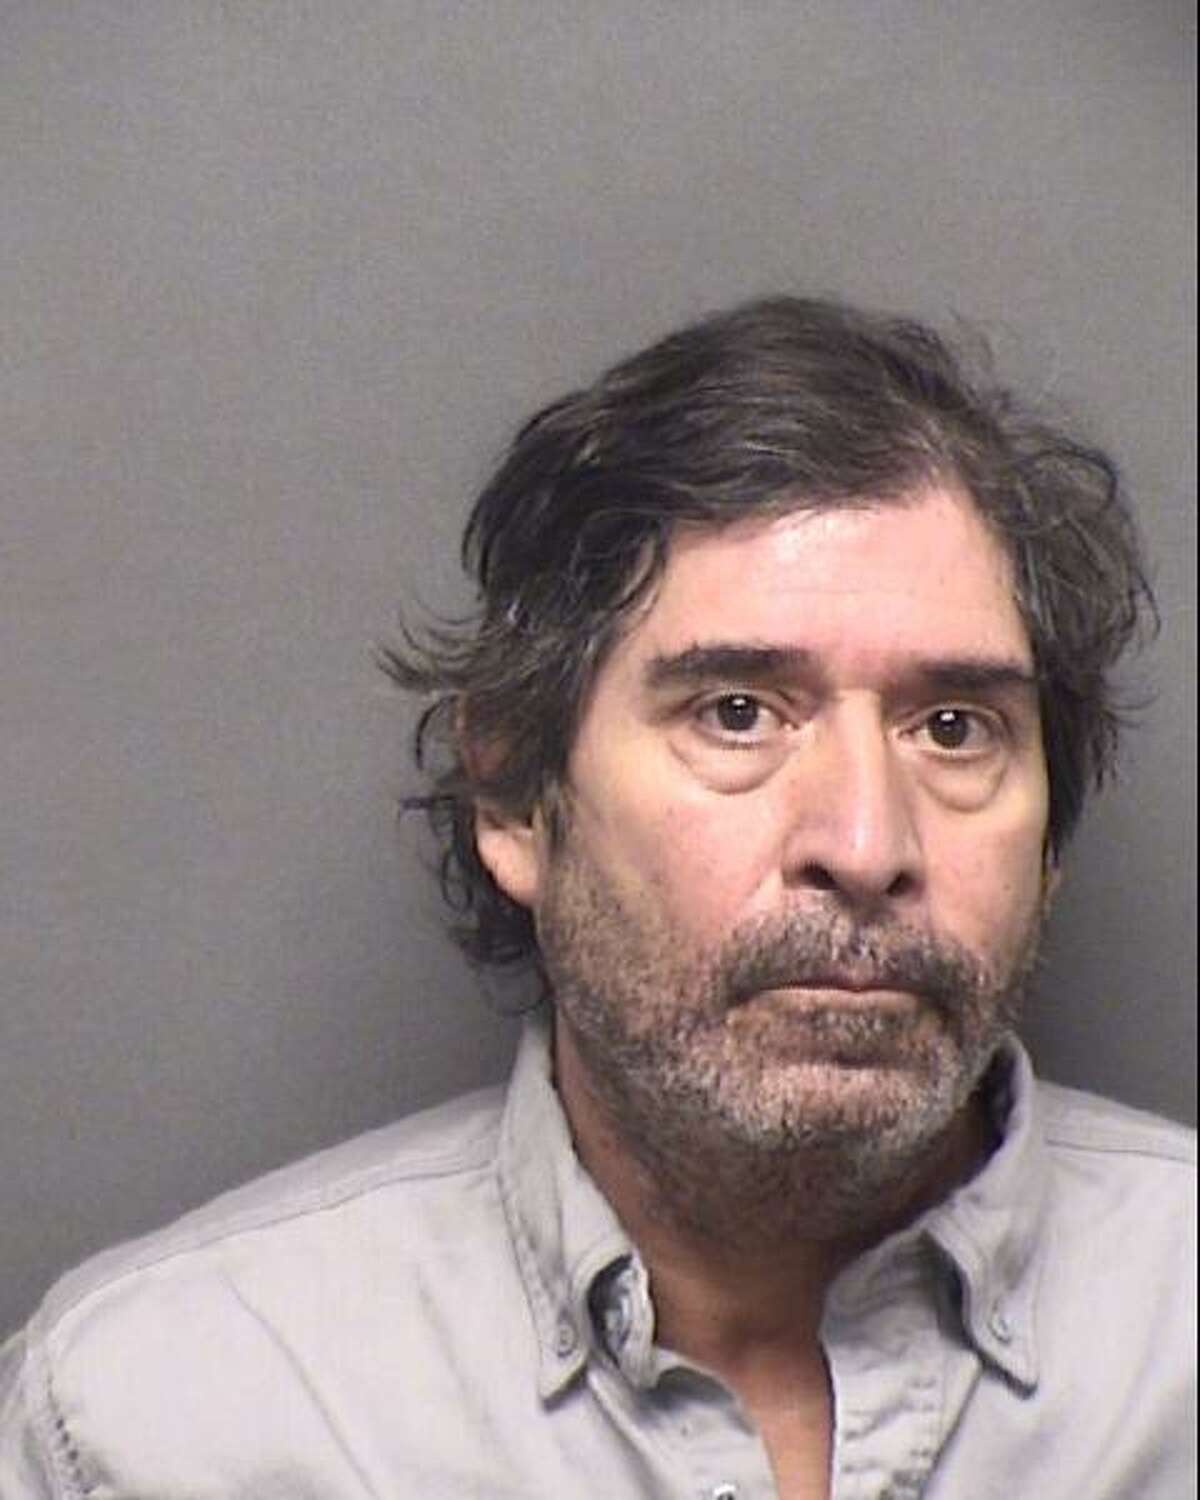 Joel Flores, 58, was arrested for allegedly stalking local TV show host Kimberly Crawford.